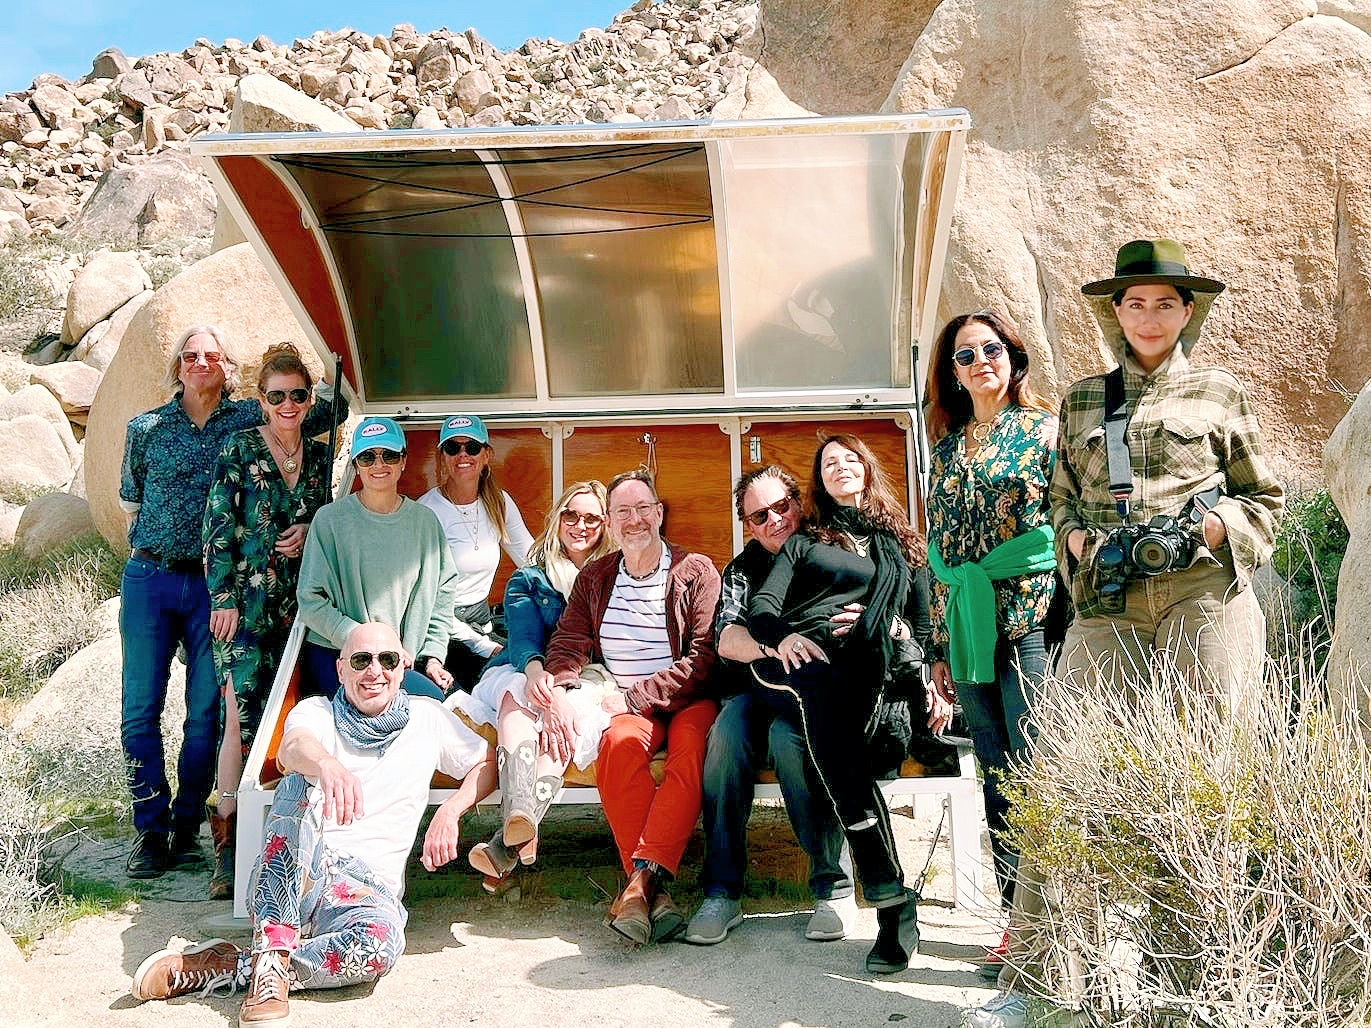 Retreat group sitting in a 'pod' in the AZ site in Joshua Tree